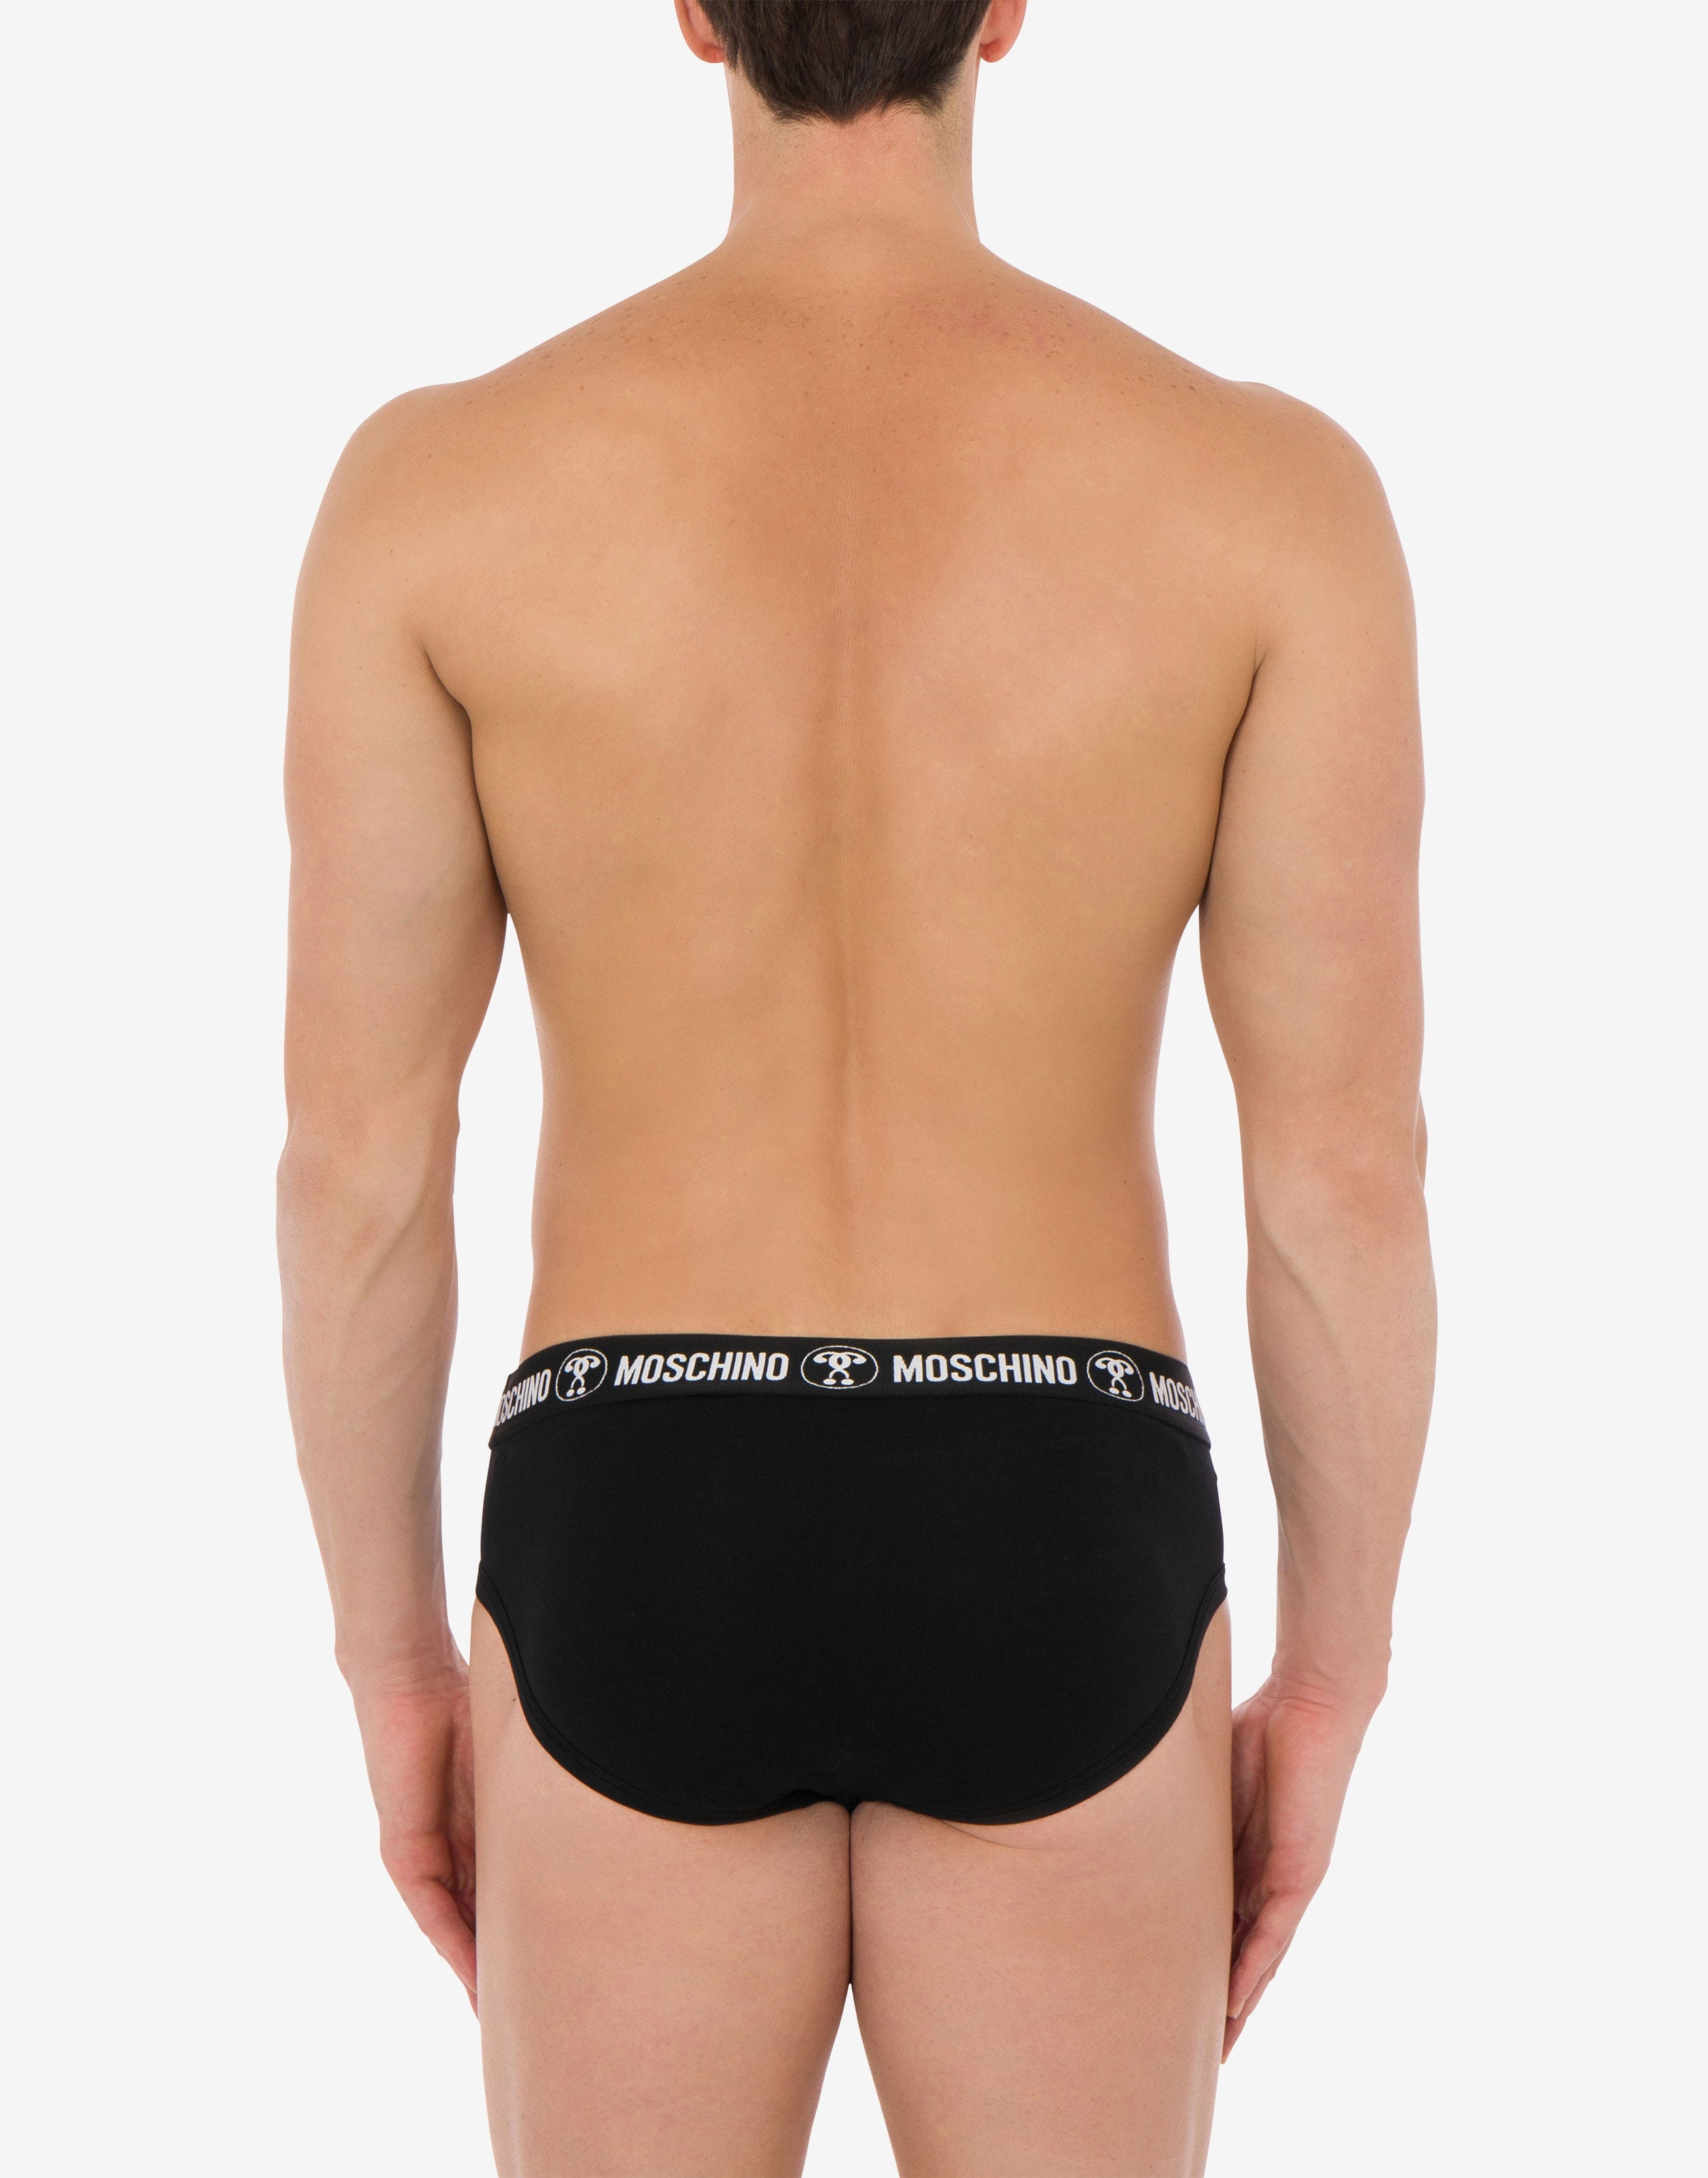 DOUBLE QUESTION MARK JERSEY BRIEFS - 3